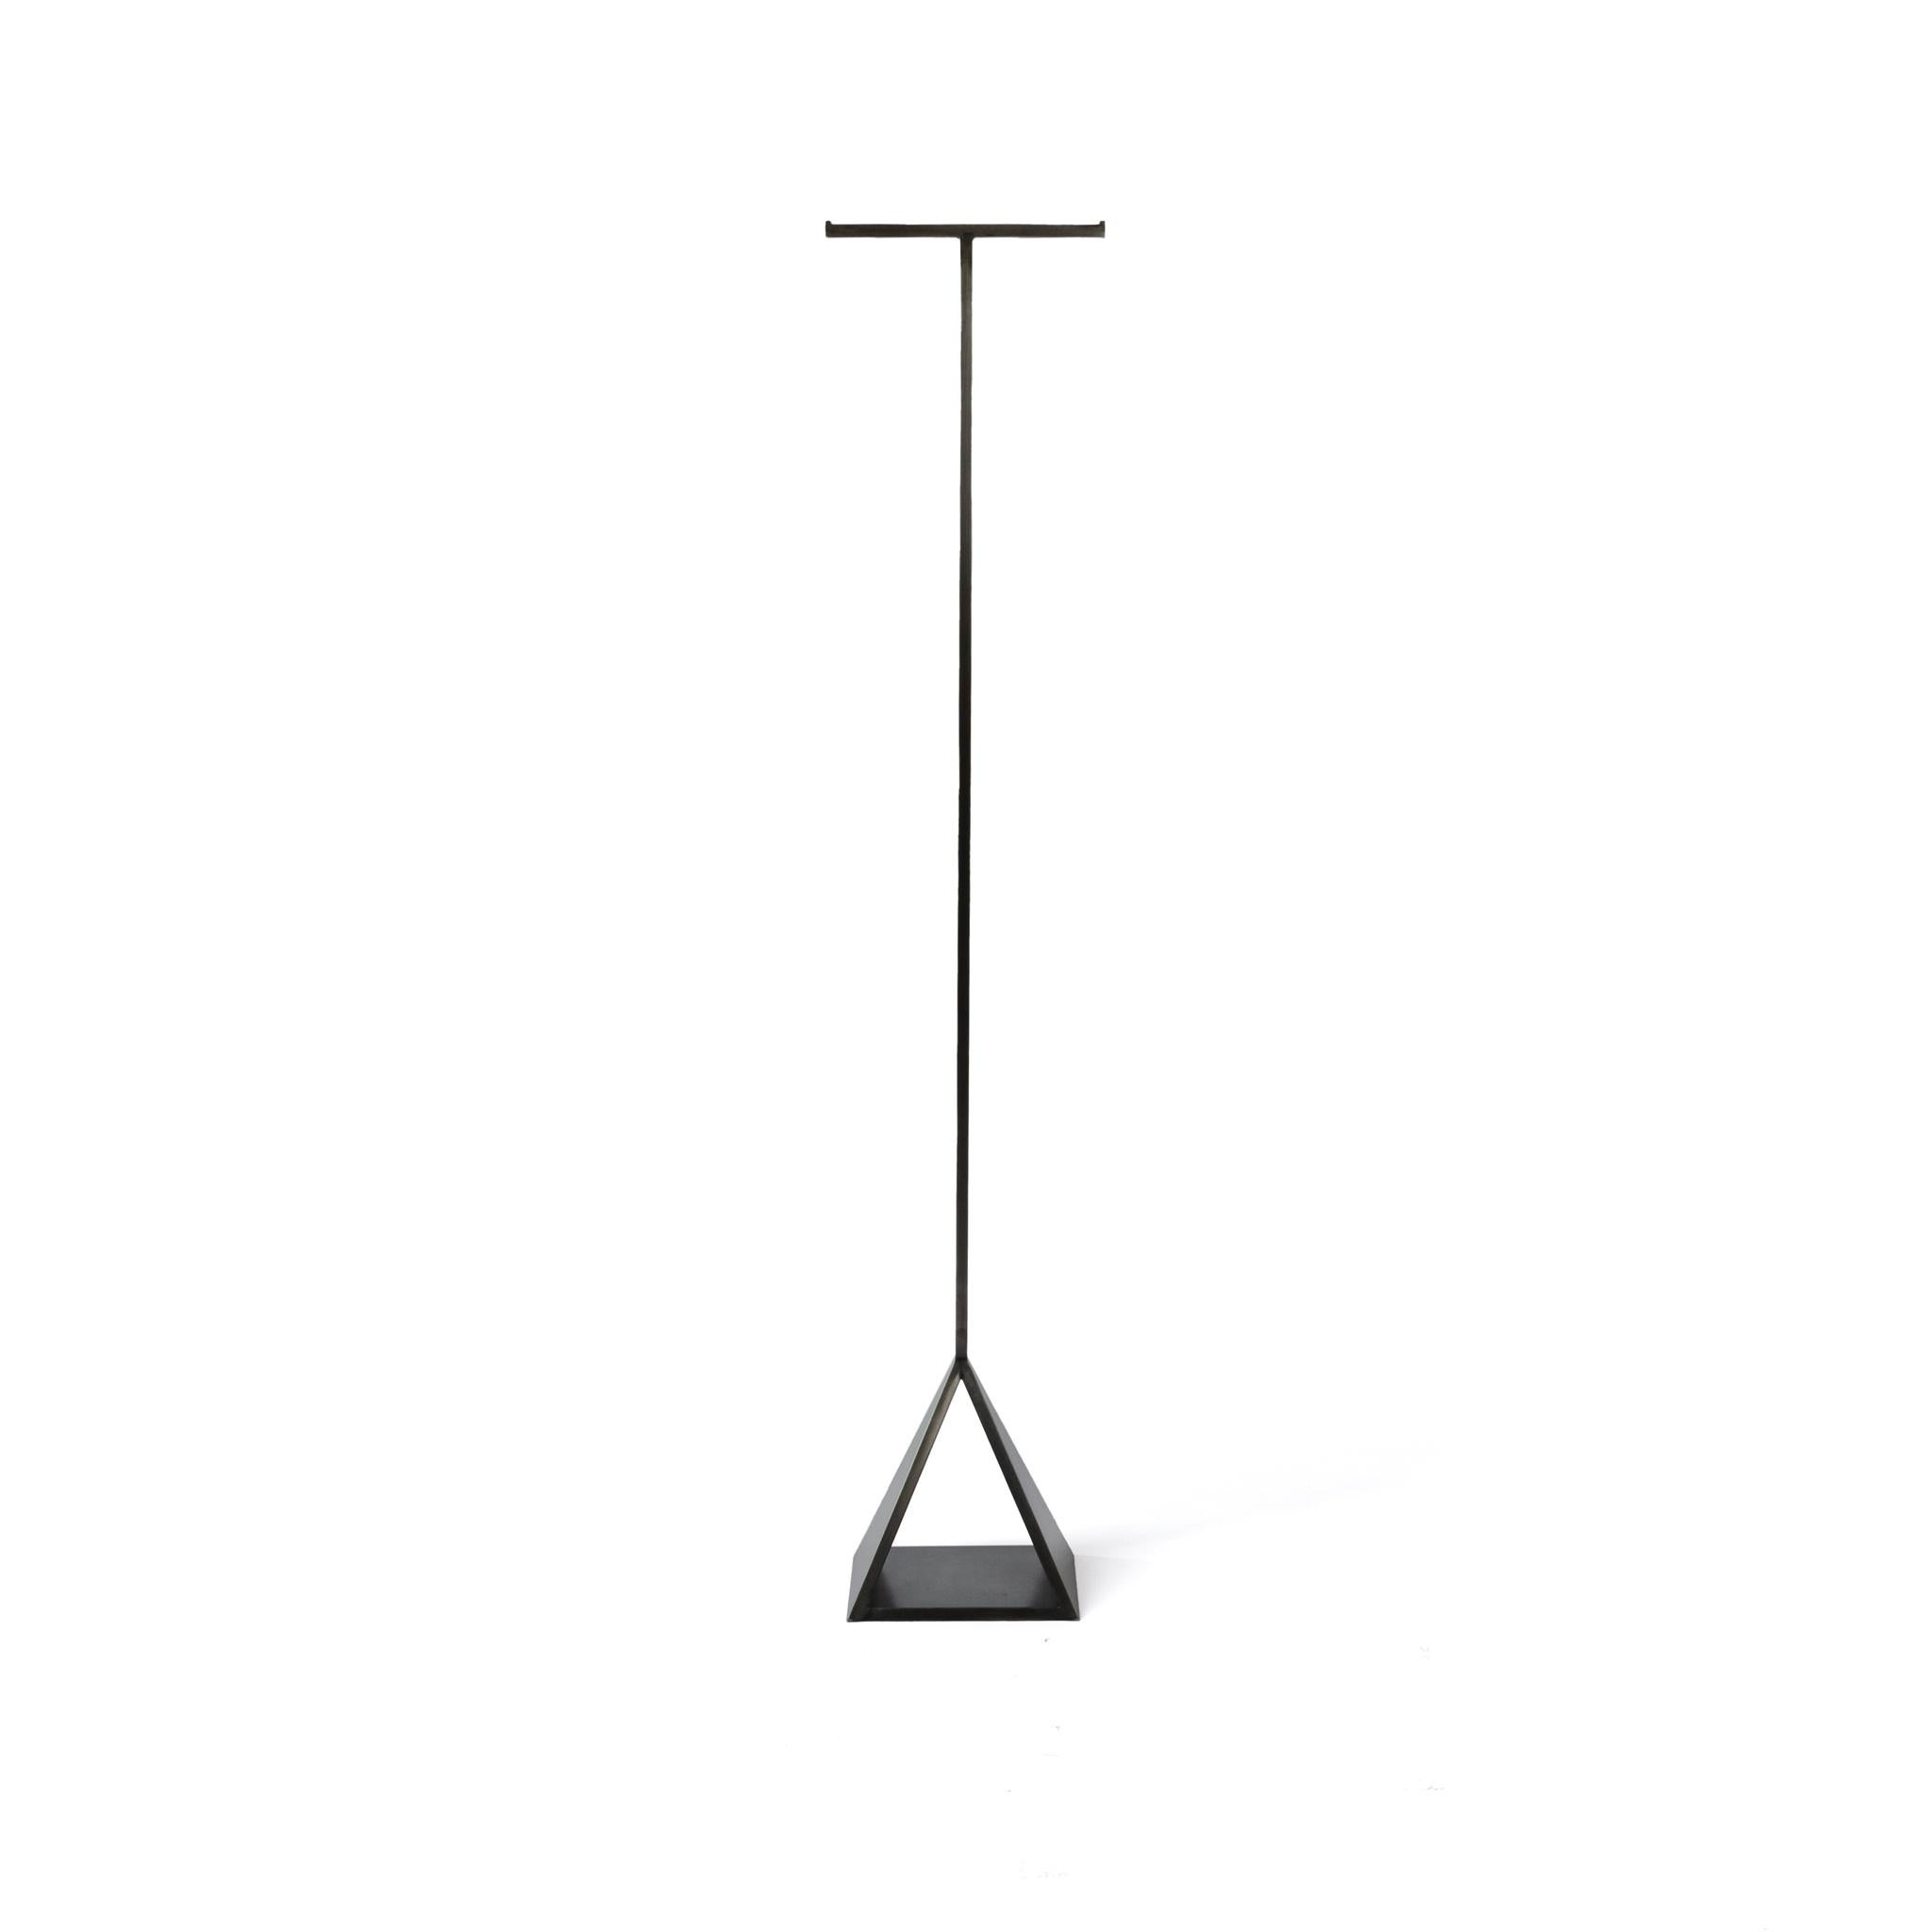 The Pyramid rack is a simple yet sturdy metal coat hanging rack with smooth edges and in a blackened steel hand finish. The use of half inch square bar to create the T-bar and open triangular base create a modern and sleek minimal design. It can be